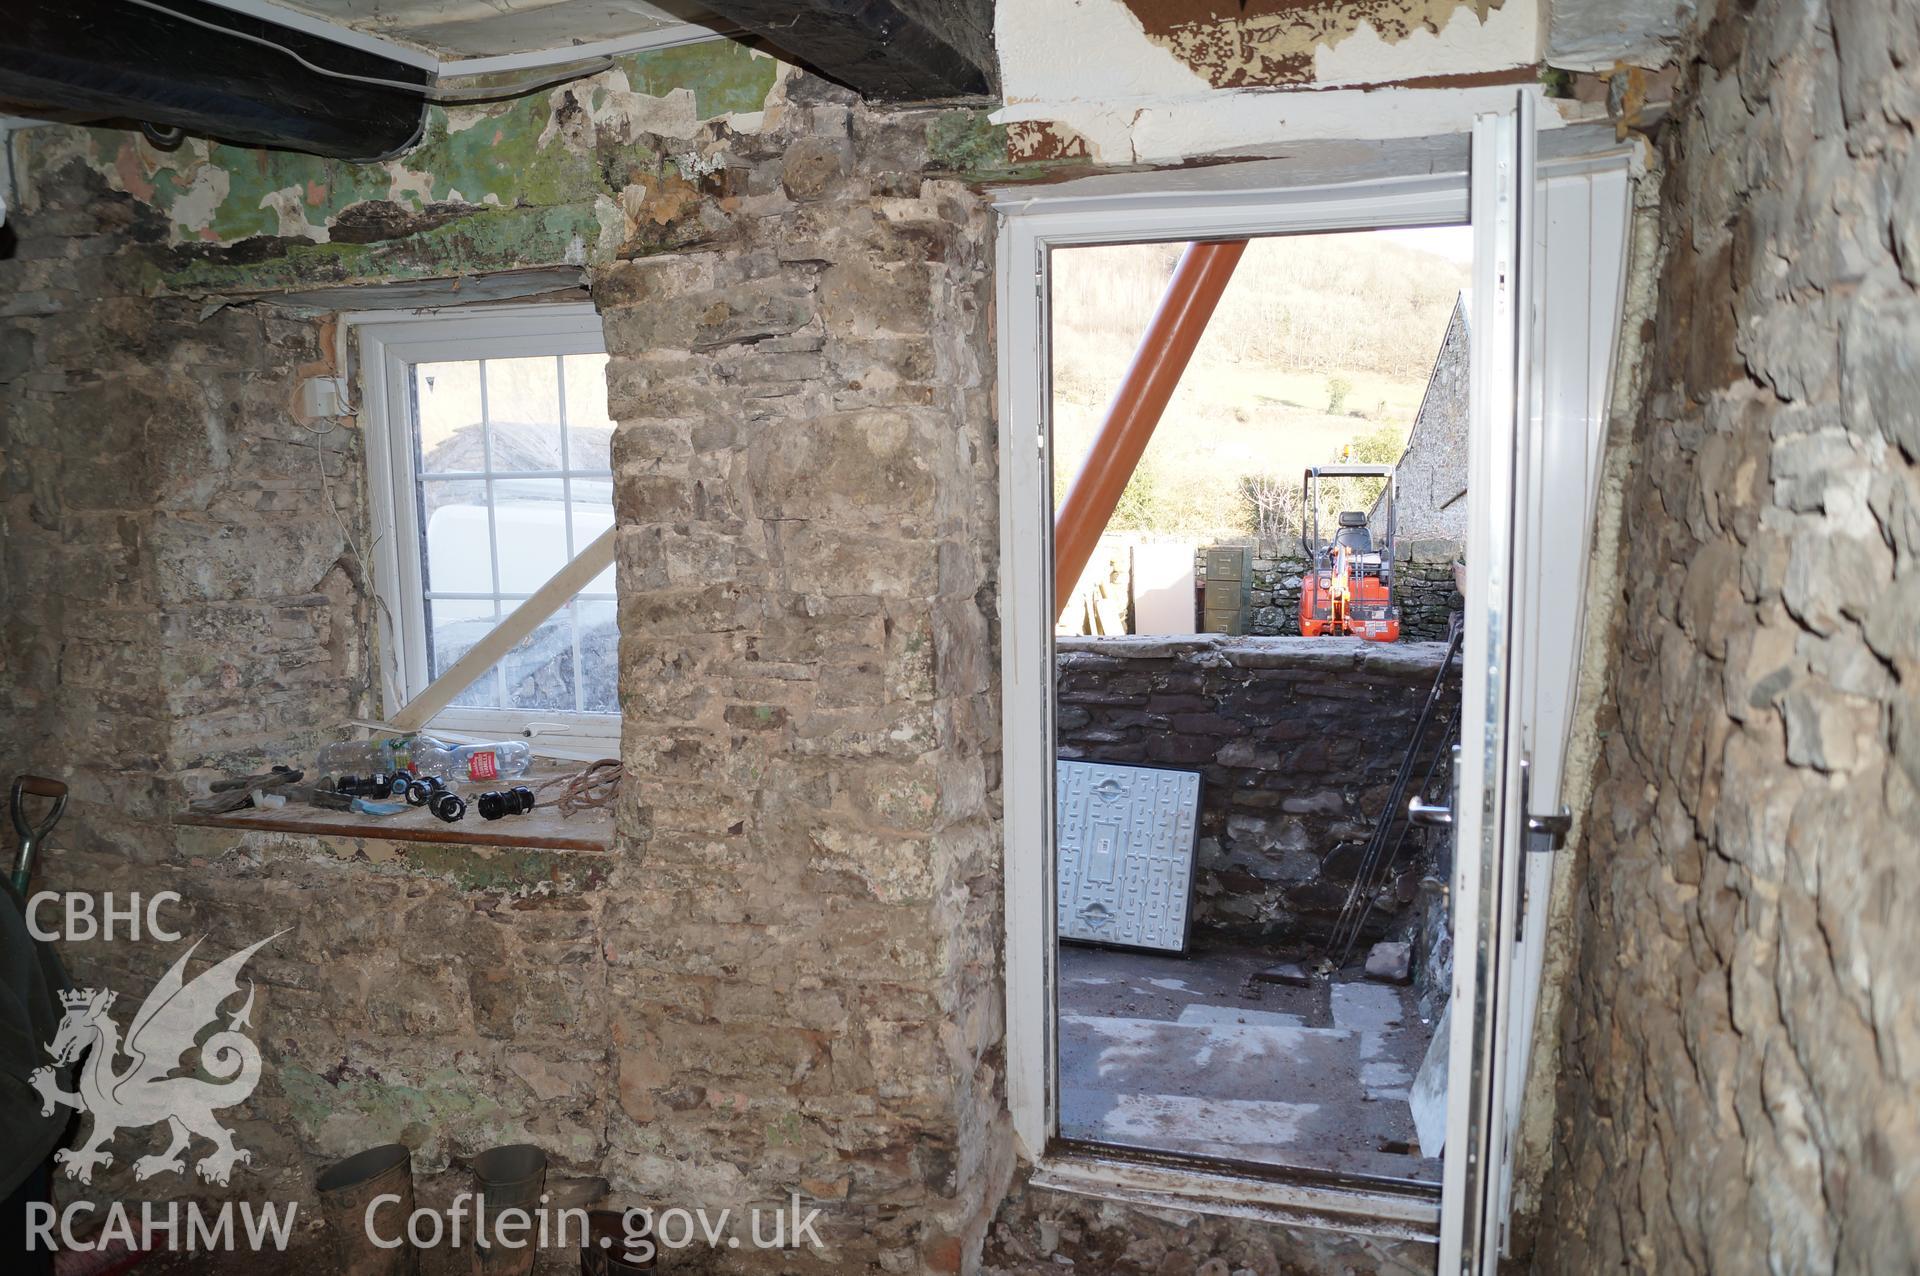 Internal view 'looking east southeast showing front room of annex. Note that the blocking-in below the window alhtough this is not visible externally' on Gwrlodau Farm, Llanbedr. Photograph & description by Jenny Hall & Paul Sambrook of Trysor, 9/2/2018.